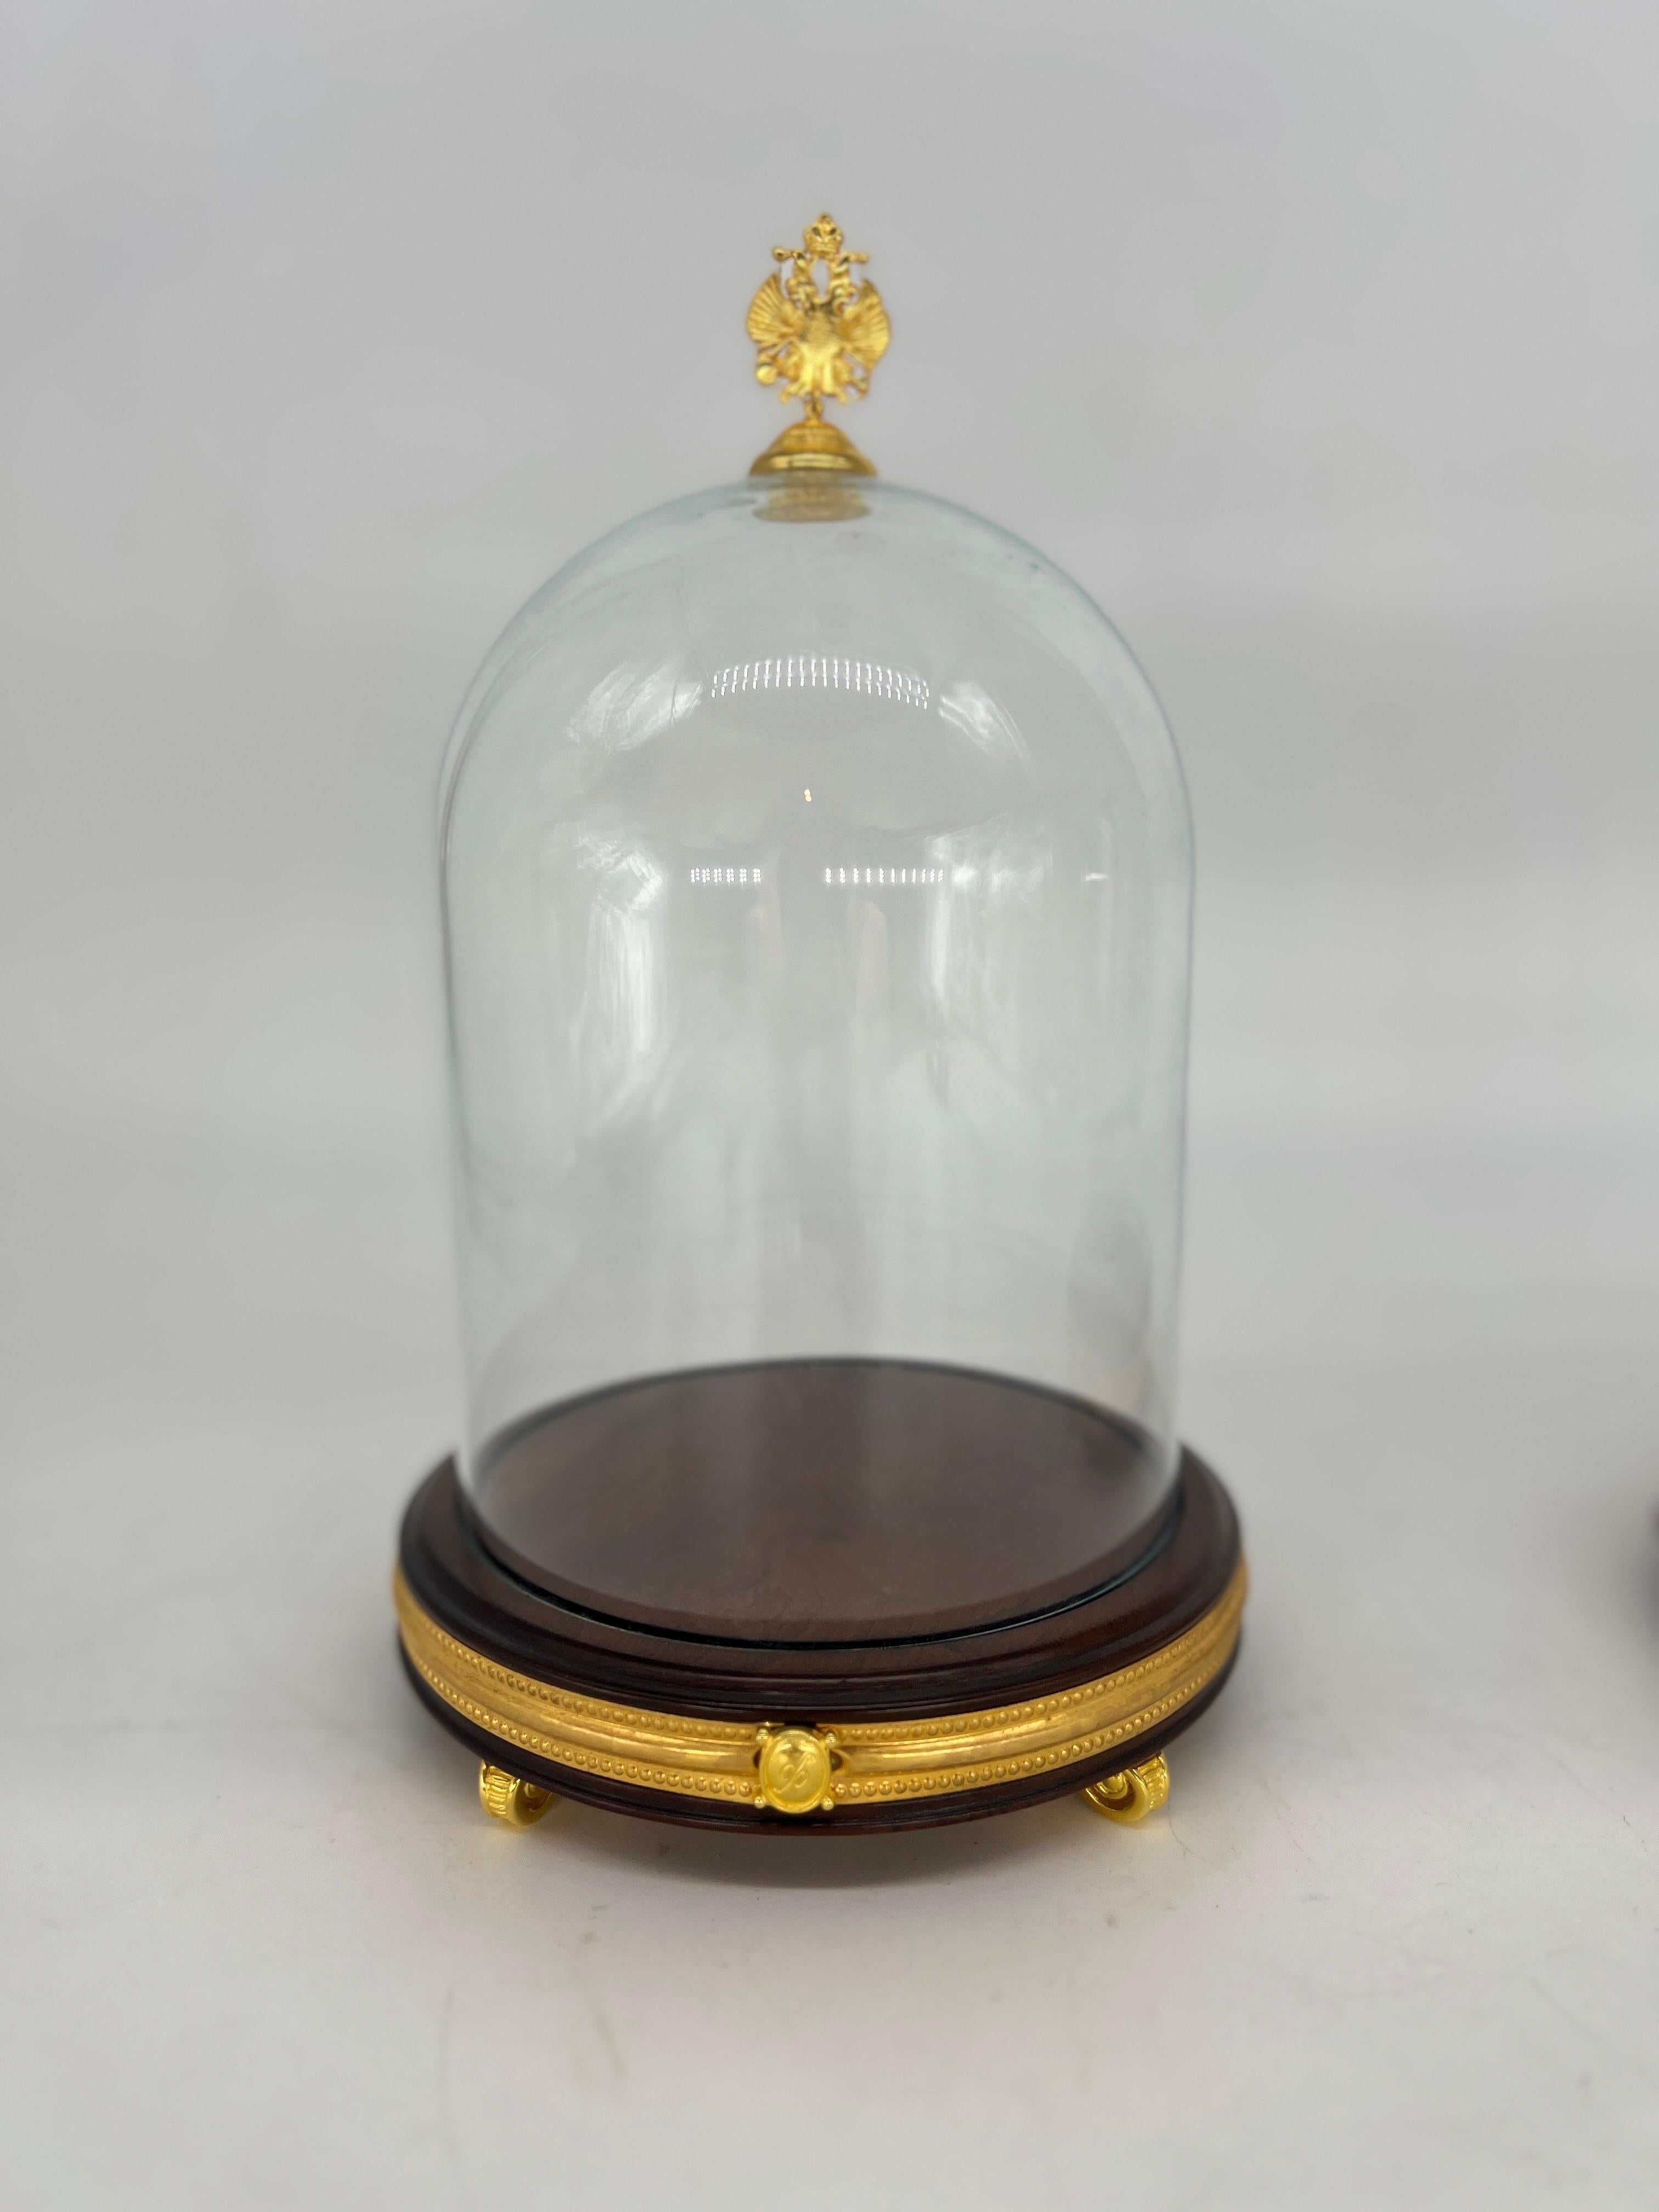 The pair of vintage House of Fabergé Ormolu mounted glass display domes is a truly exquisite find for any collector or lover of fine craftsmanship. These elegant domes are meticulously crafted with a combination of Ormolu, a gilded bronze, and